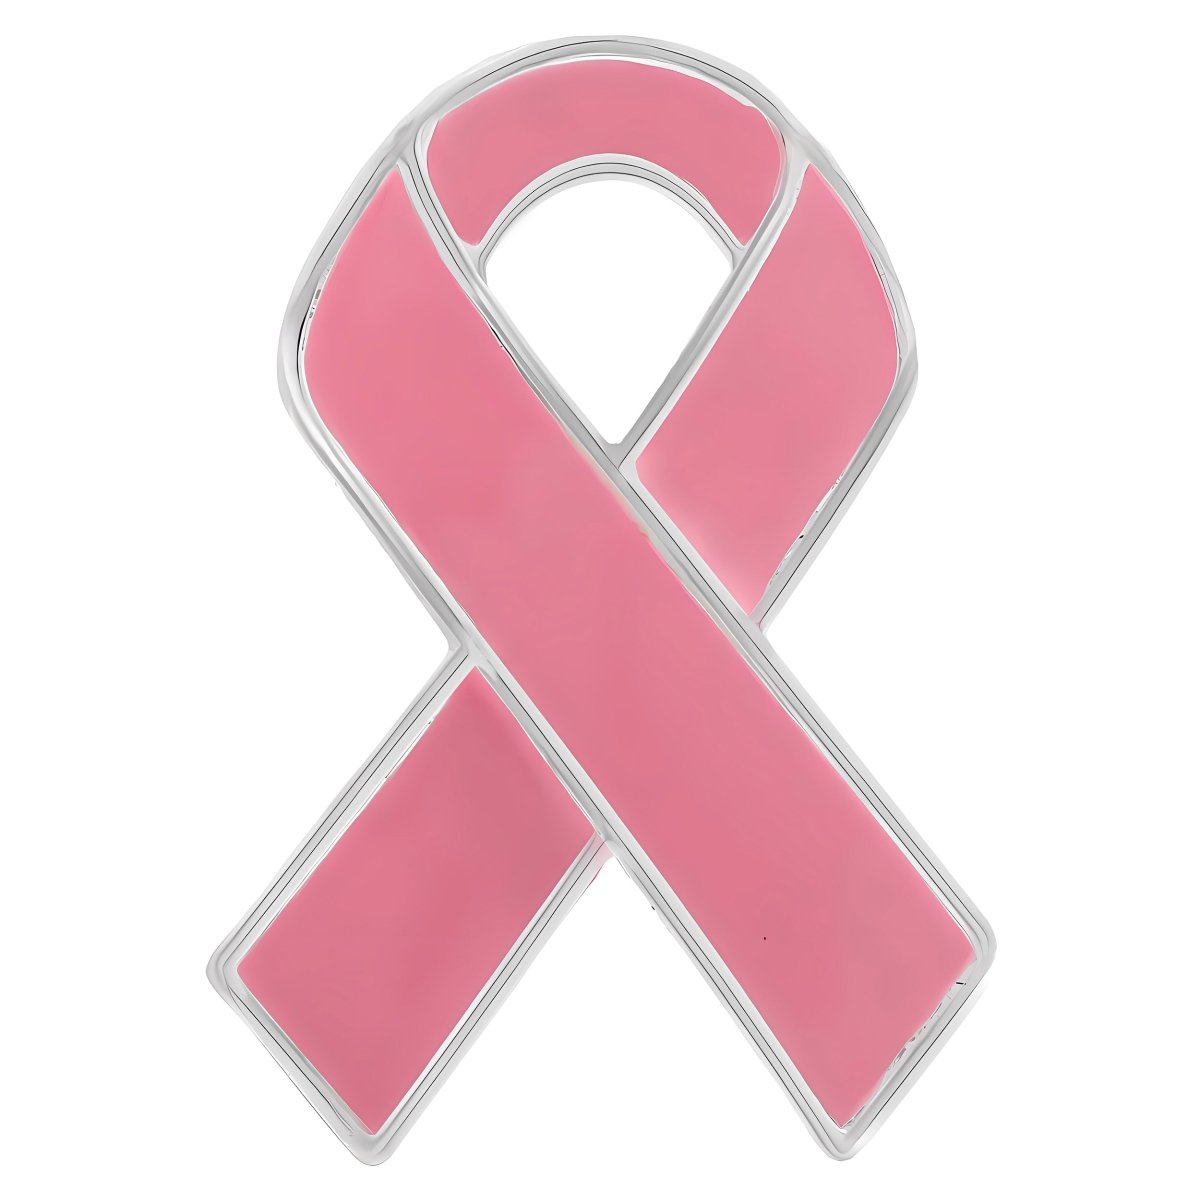 Breast Cancer Awareness Ribbon Pins - Fundraising For A Cause